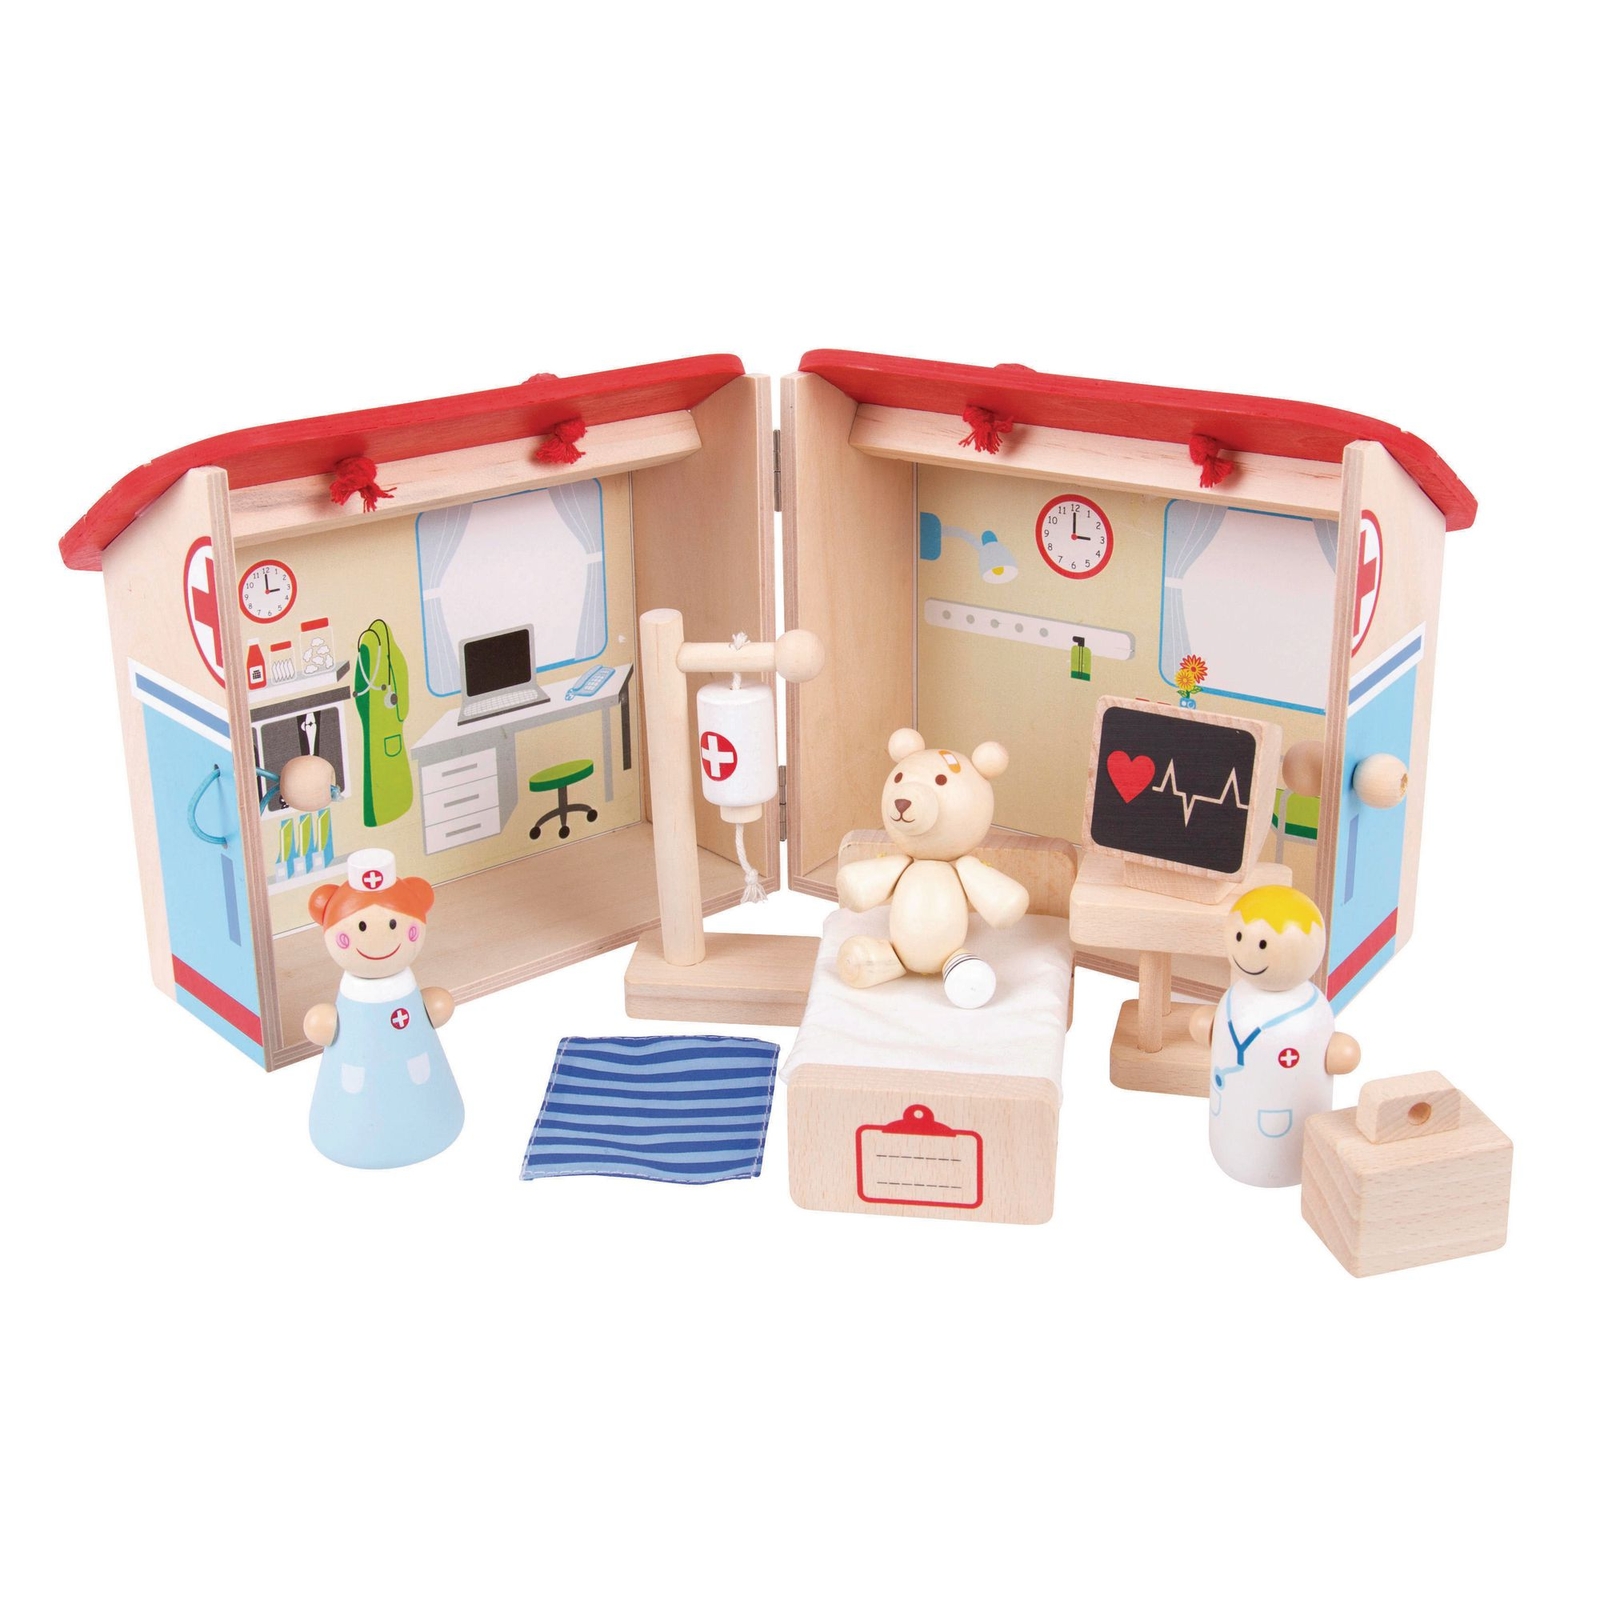 Bigjigs Toys Wooden Mini Hospital Playset - Assorted - Pack of 9